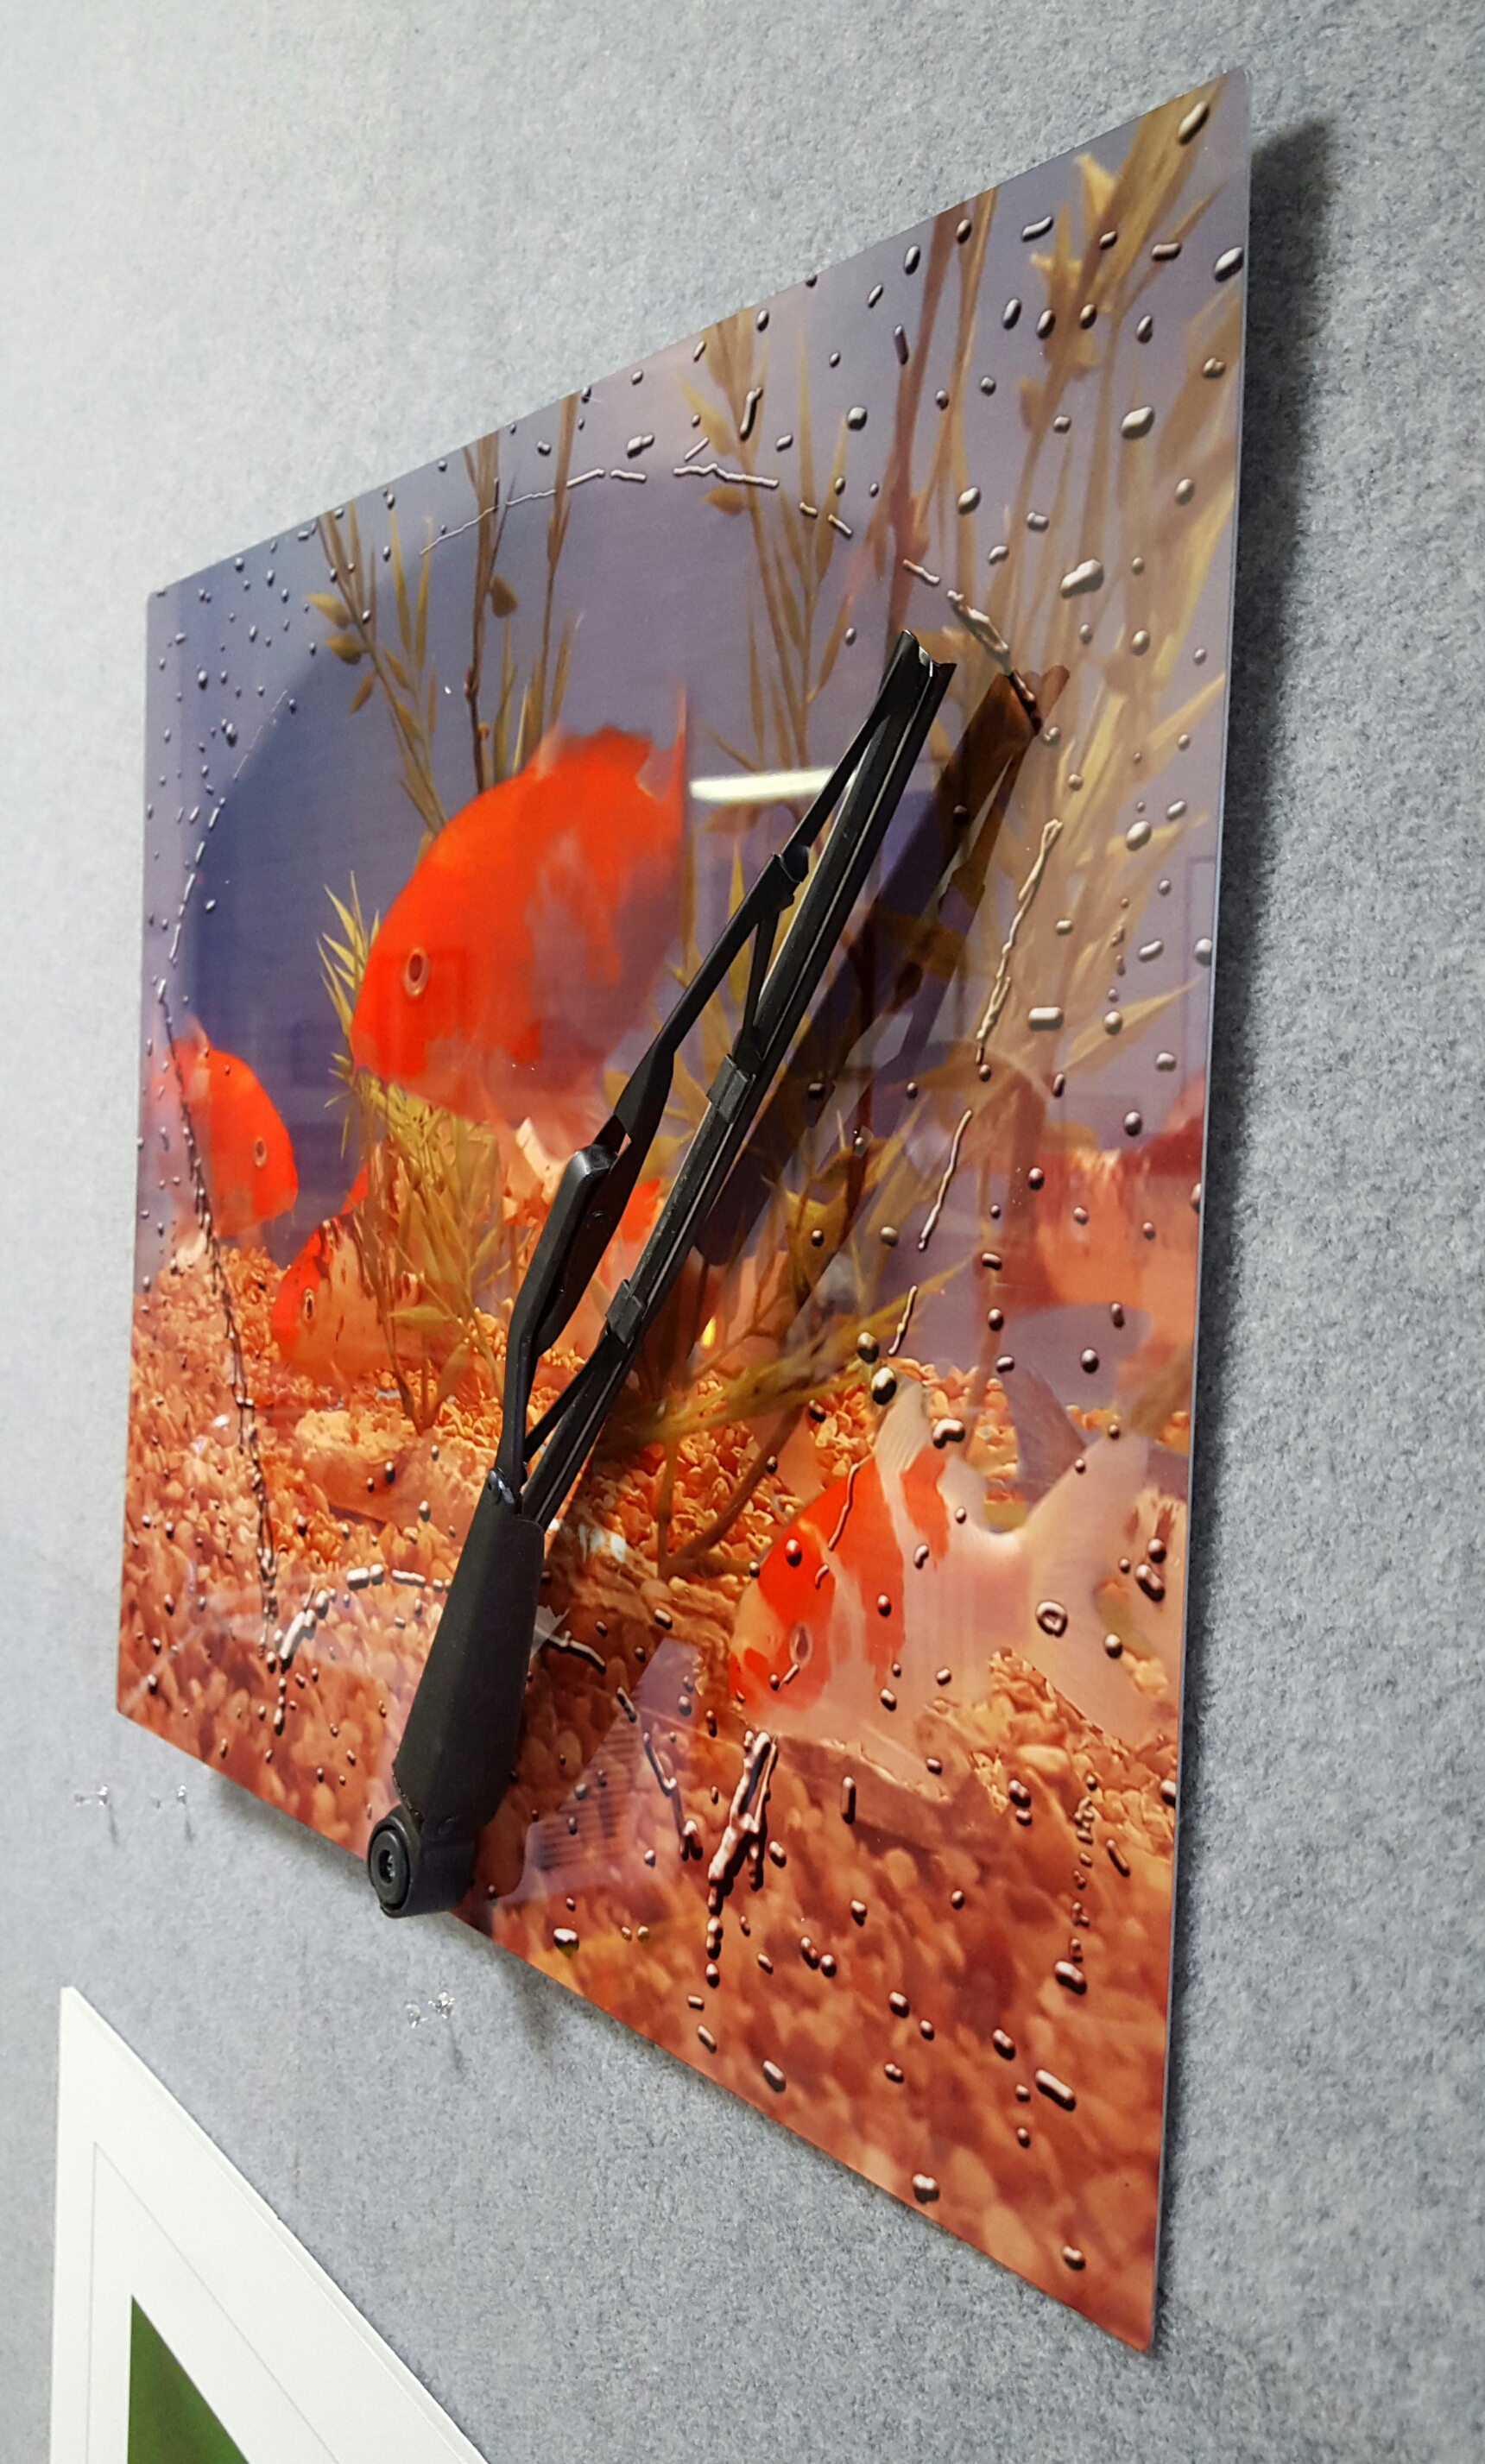 3D art panel fish like clean glass too. made with sublimation printing